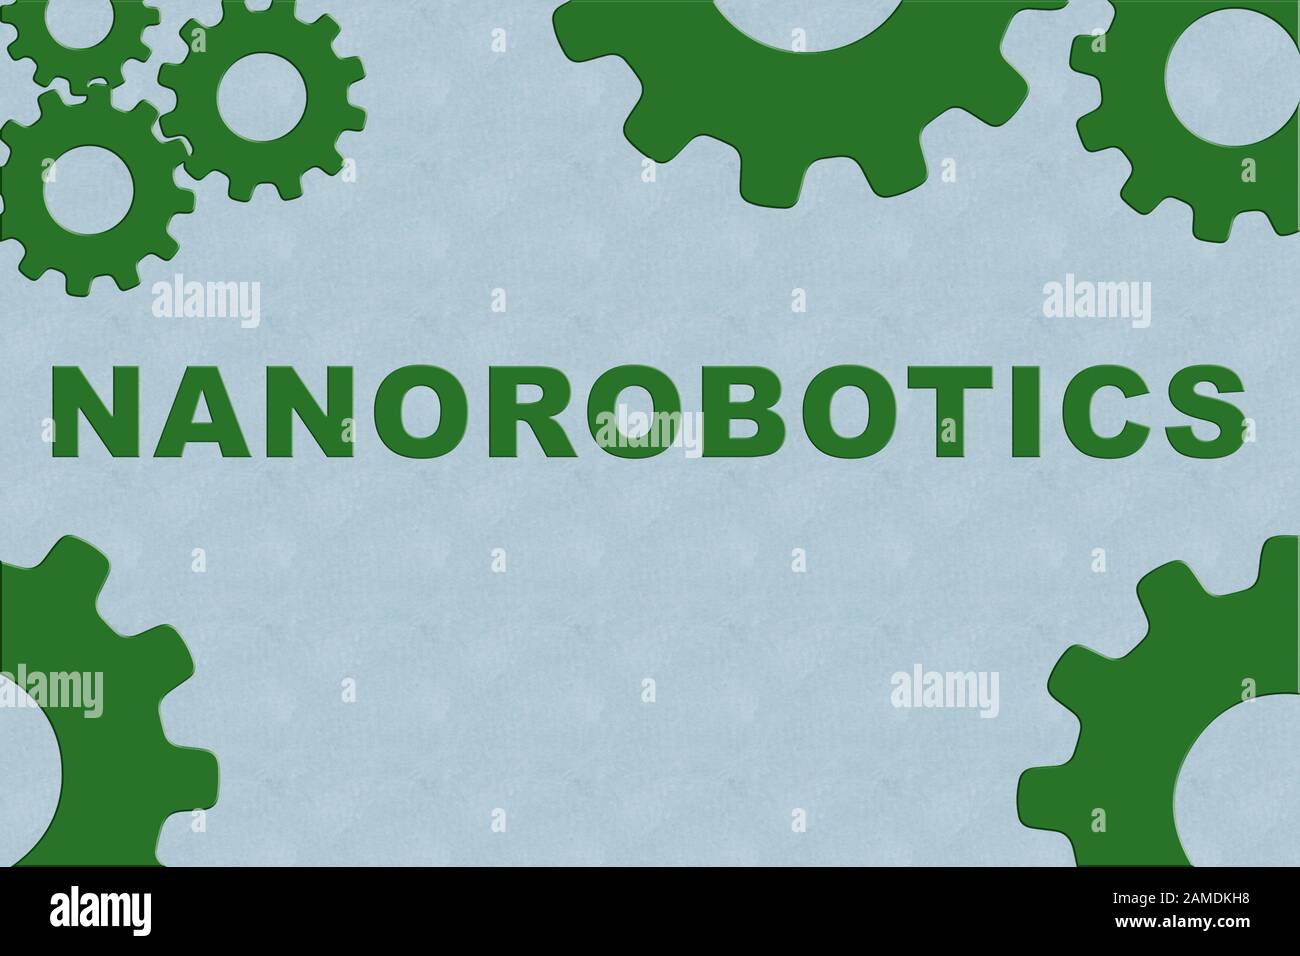 NANOROBOTICS sign concept illustration with green gear wheel figures on pale pattern background Stock Photo